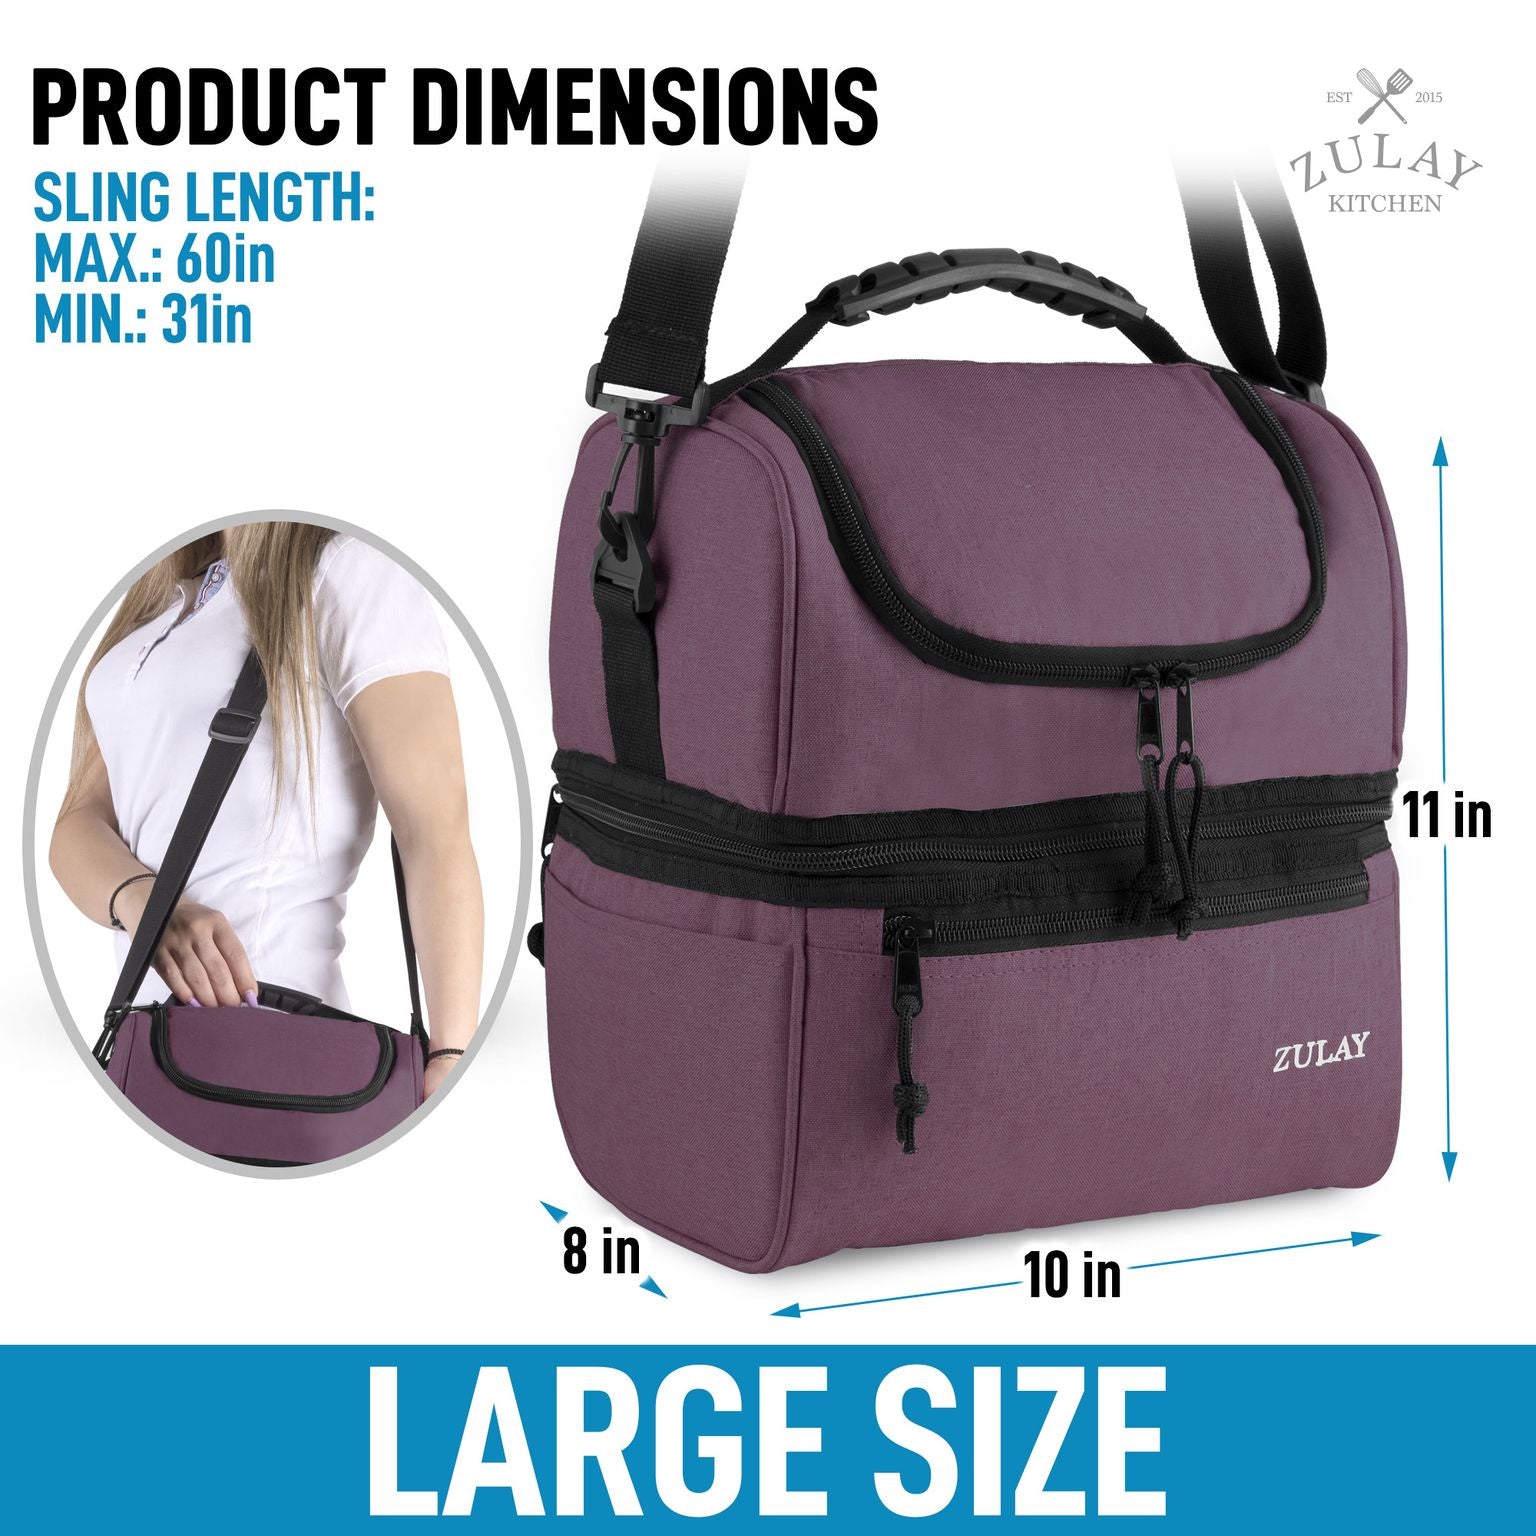 Insulated 2-Compartment Lunch Box Bag With Strap Online | Zulay Kitchen -  Save Big Today